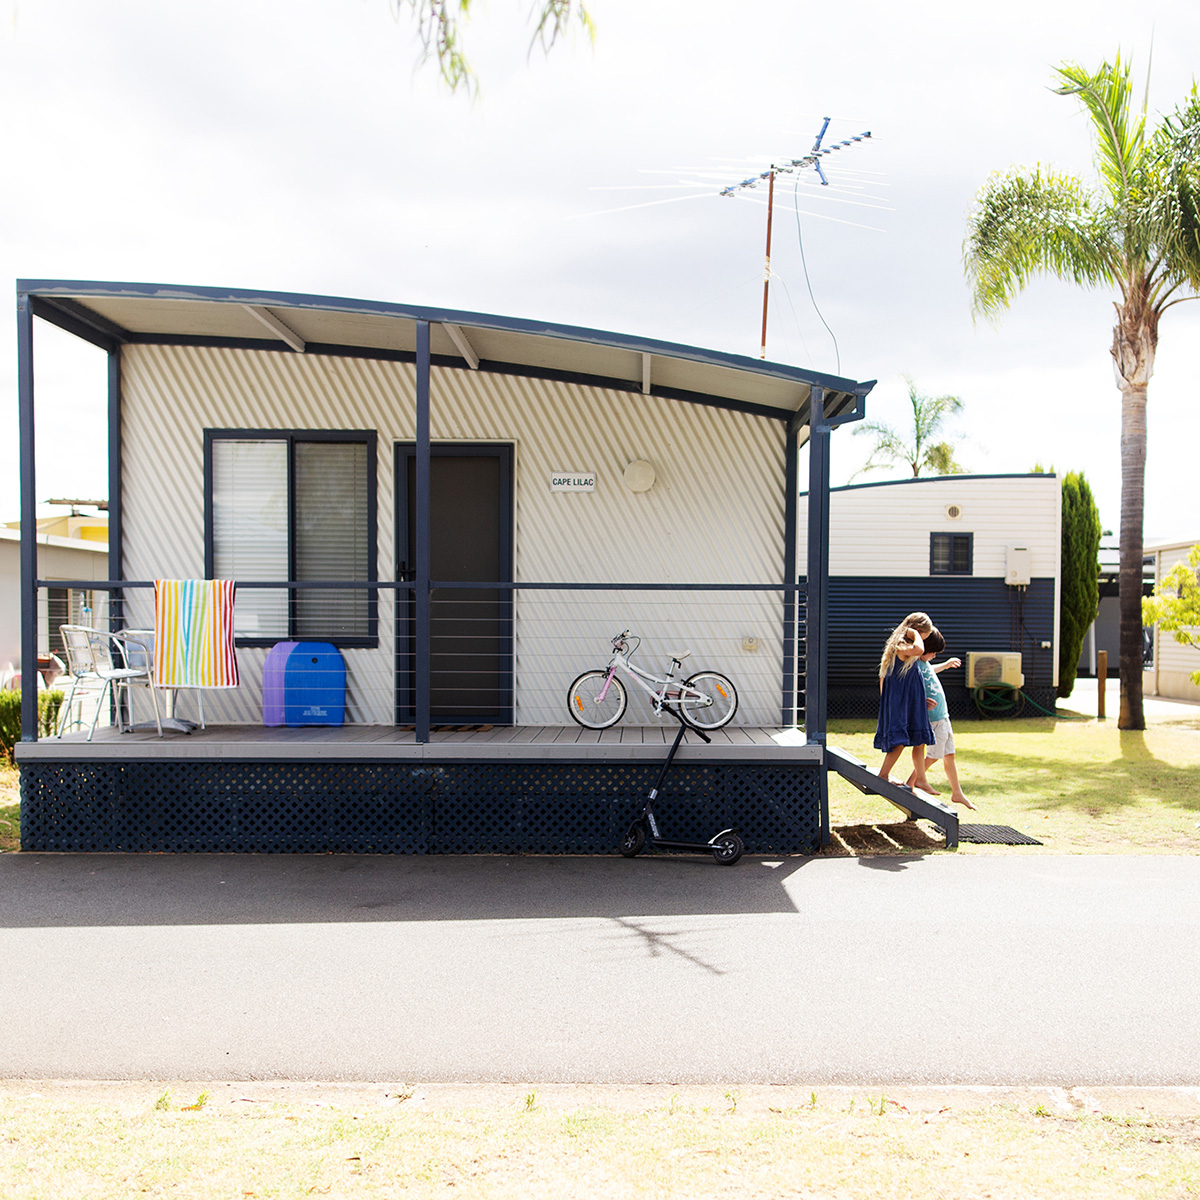 Busselton Accommodation Chalets | Busselton Holiday Village | Margaret River. Come & enjoy the relaxed Busselton lifestyle in our self contained Chalets